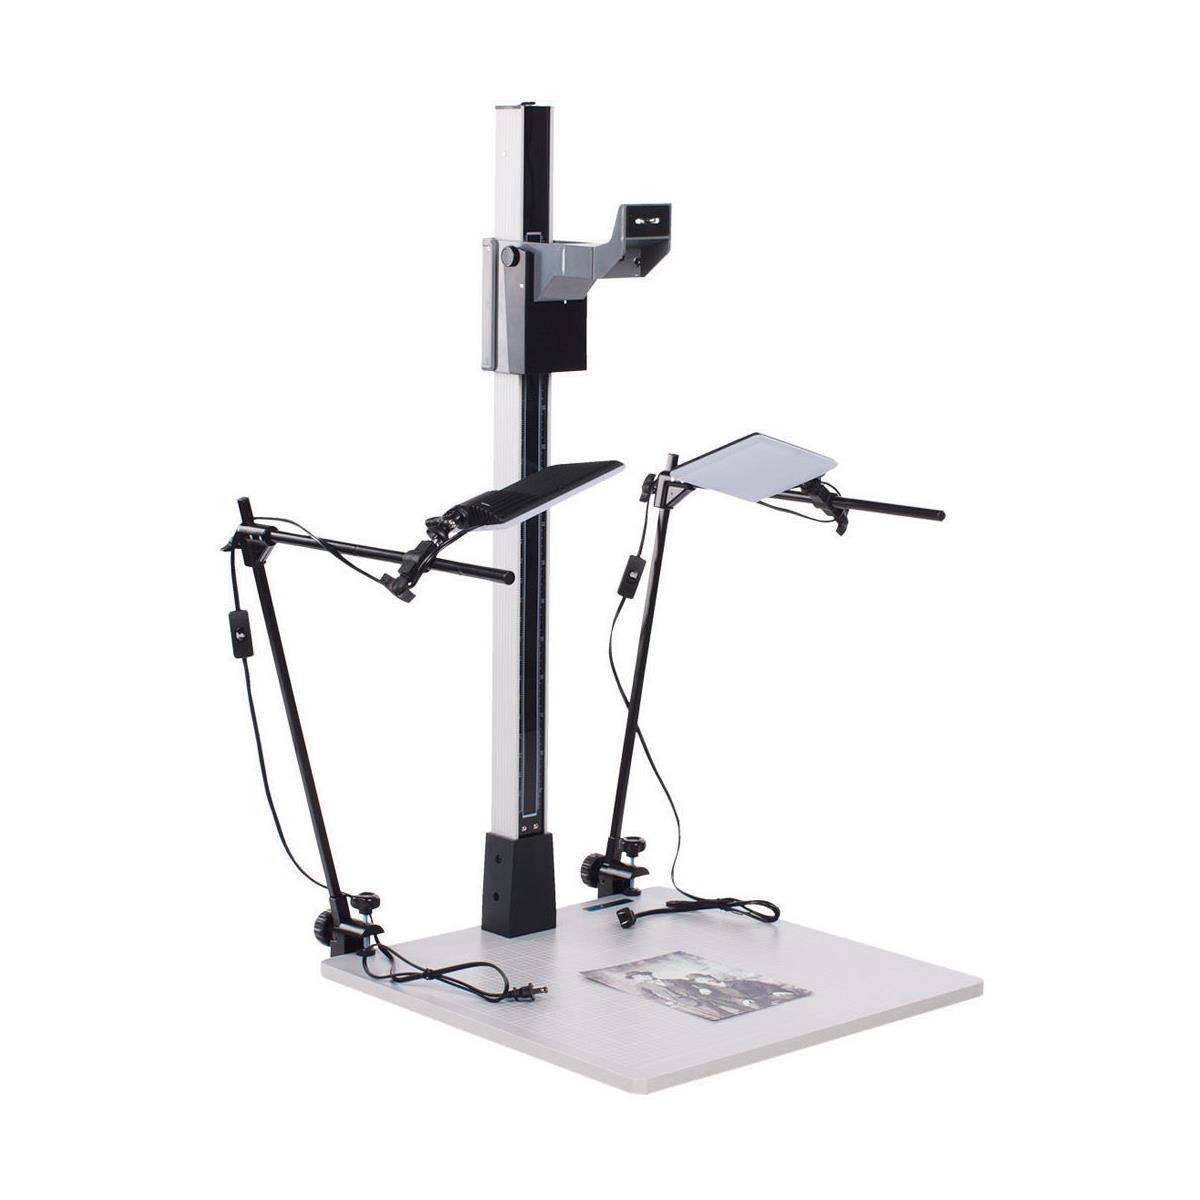 Smith-Victor 42" Pro-Duty Copy Stand Kit with LED Lights